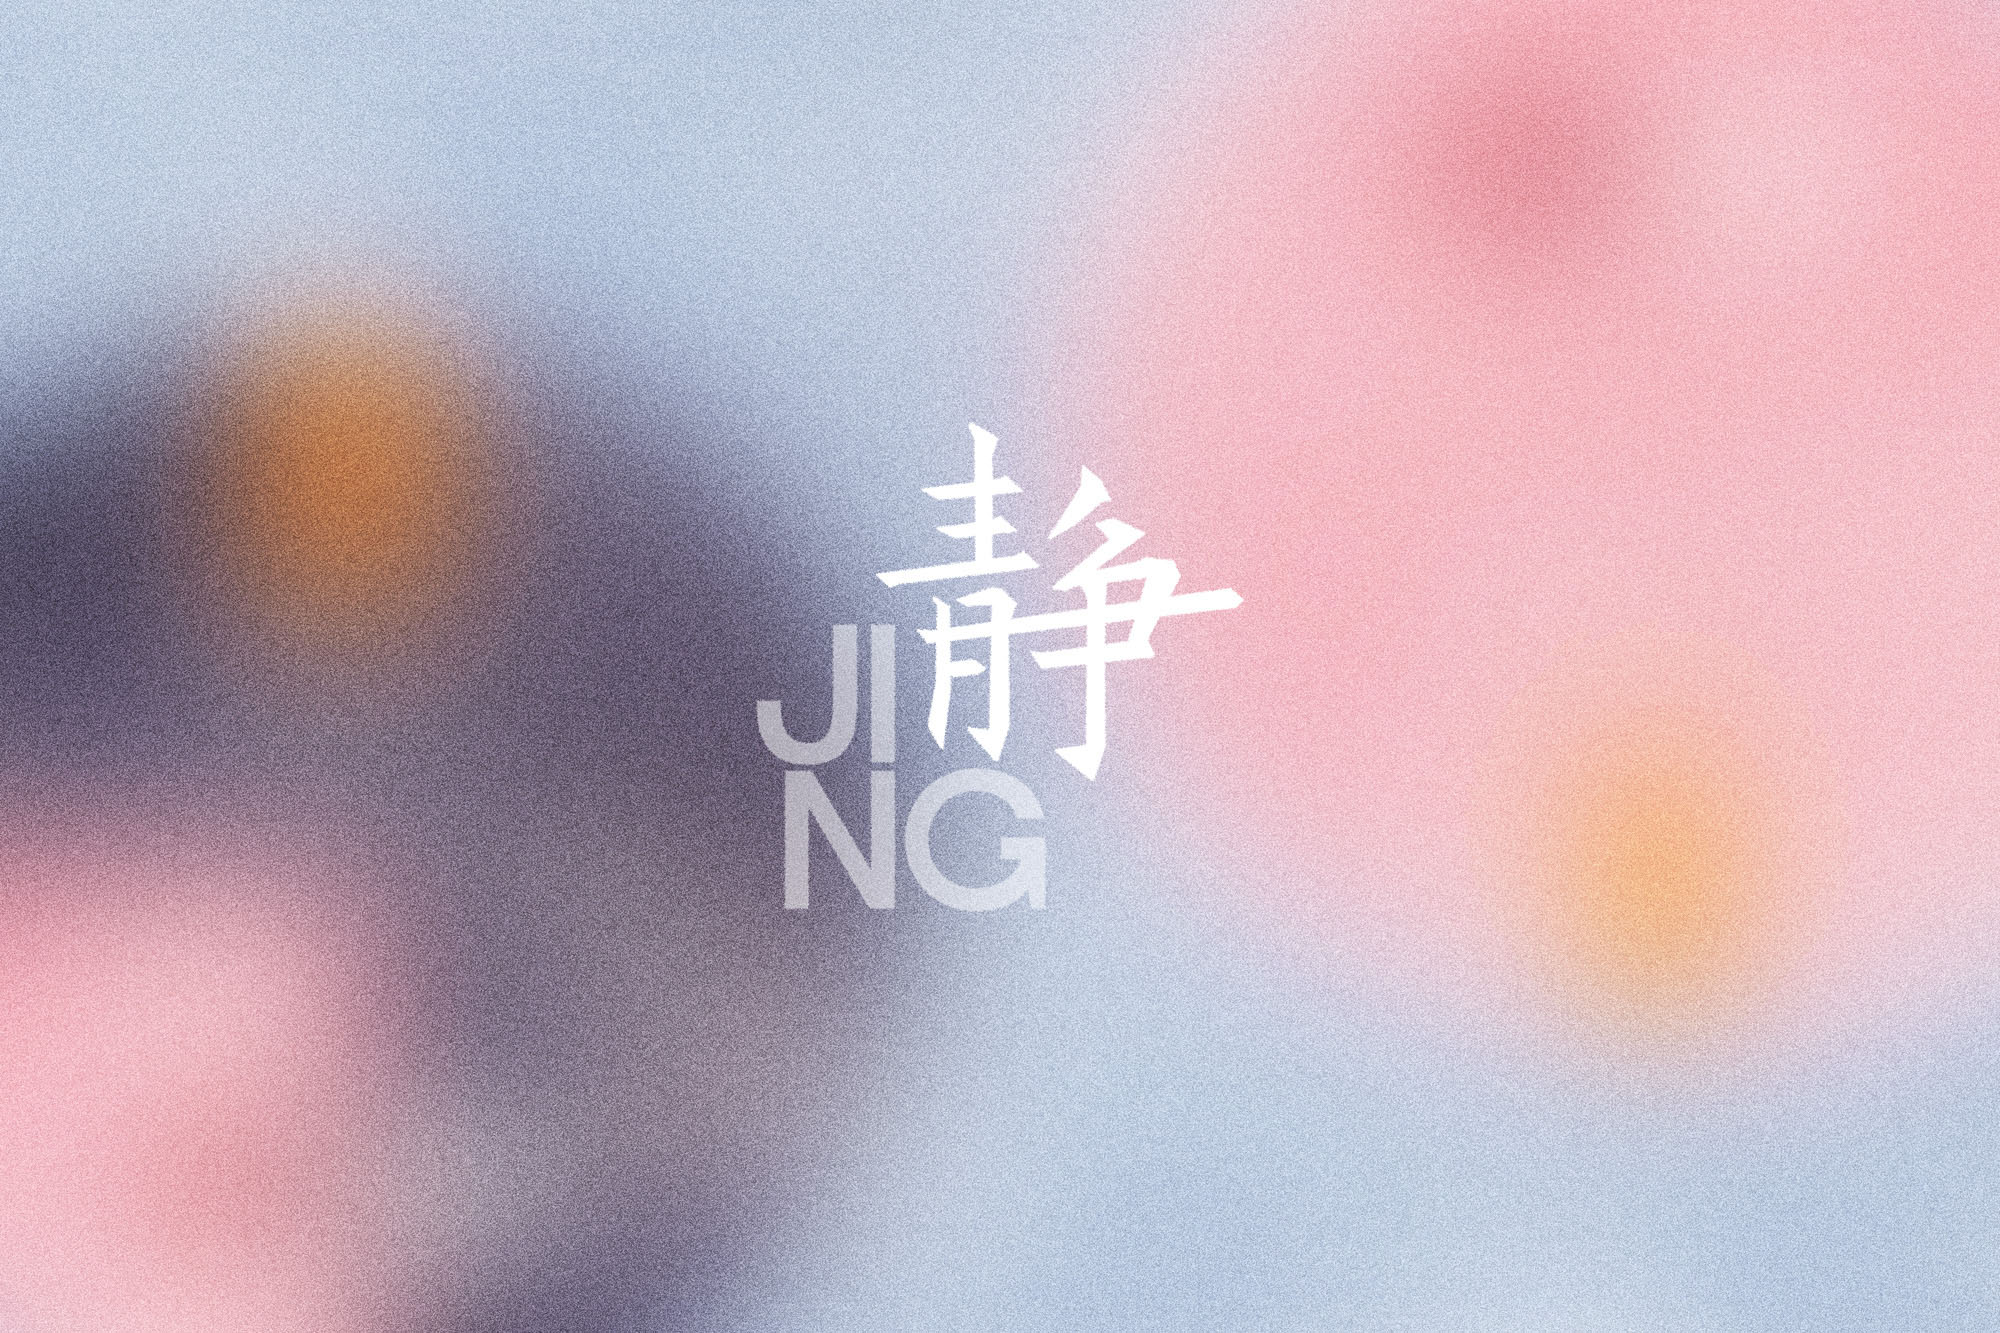 New Identity and Record Packaging for Indie Rock Band Jing by Yihuang Zhou